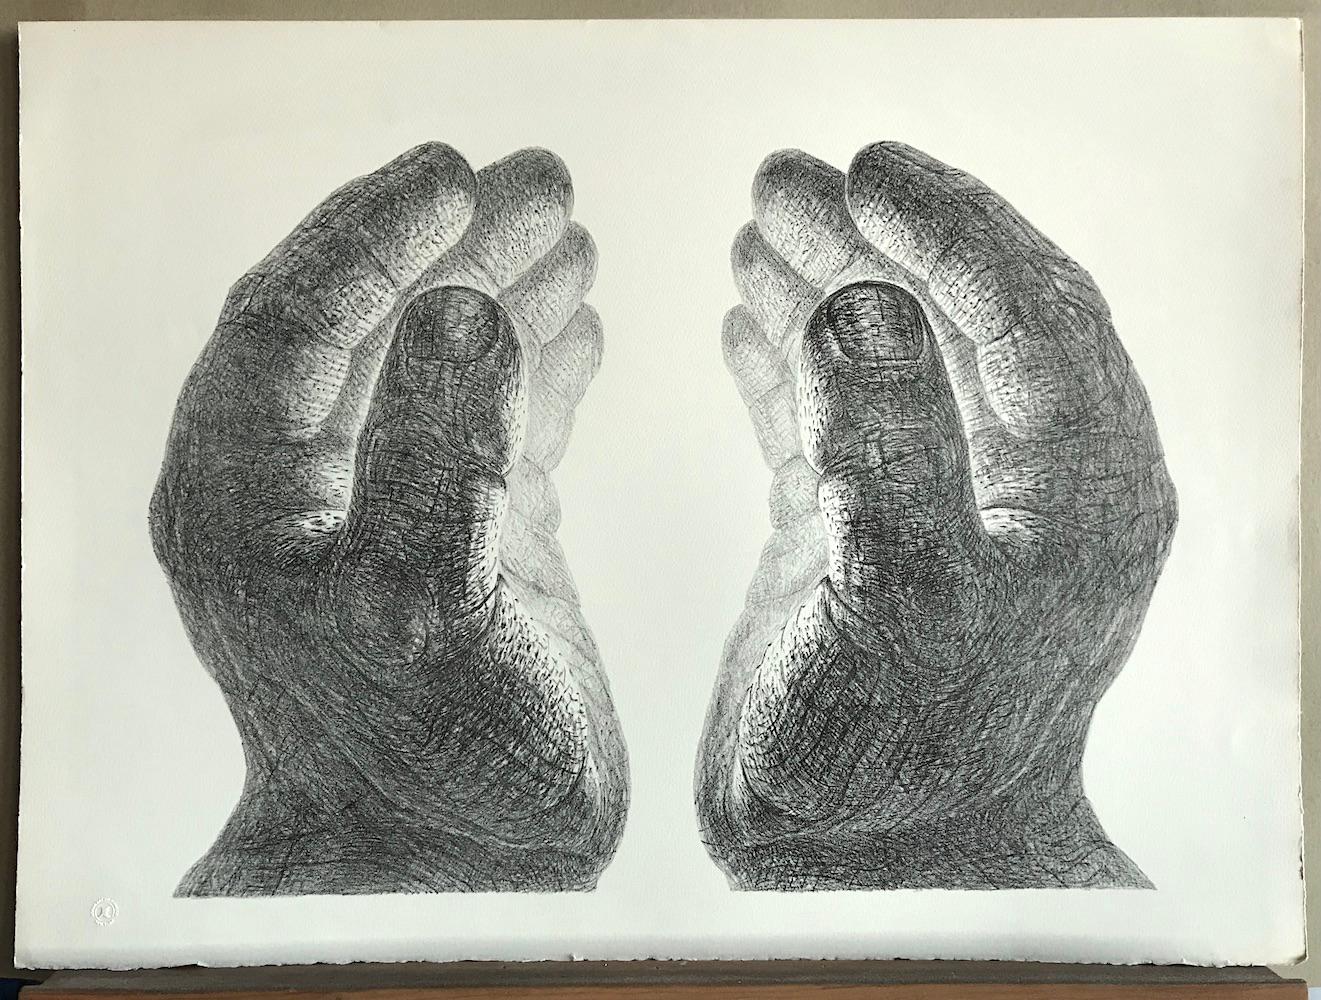 CREATION Hand Drawn Lithograph, Cupped Pair of Hands, Light Glow, Meditation - Surrealist Print by De Es Schwertberger